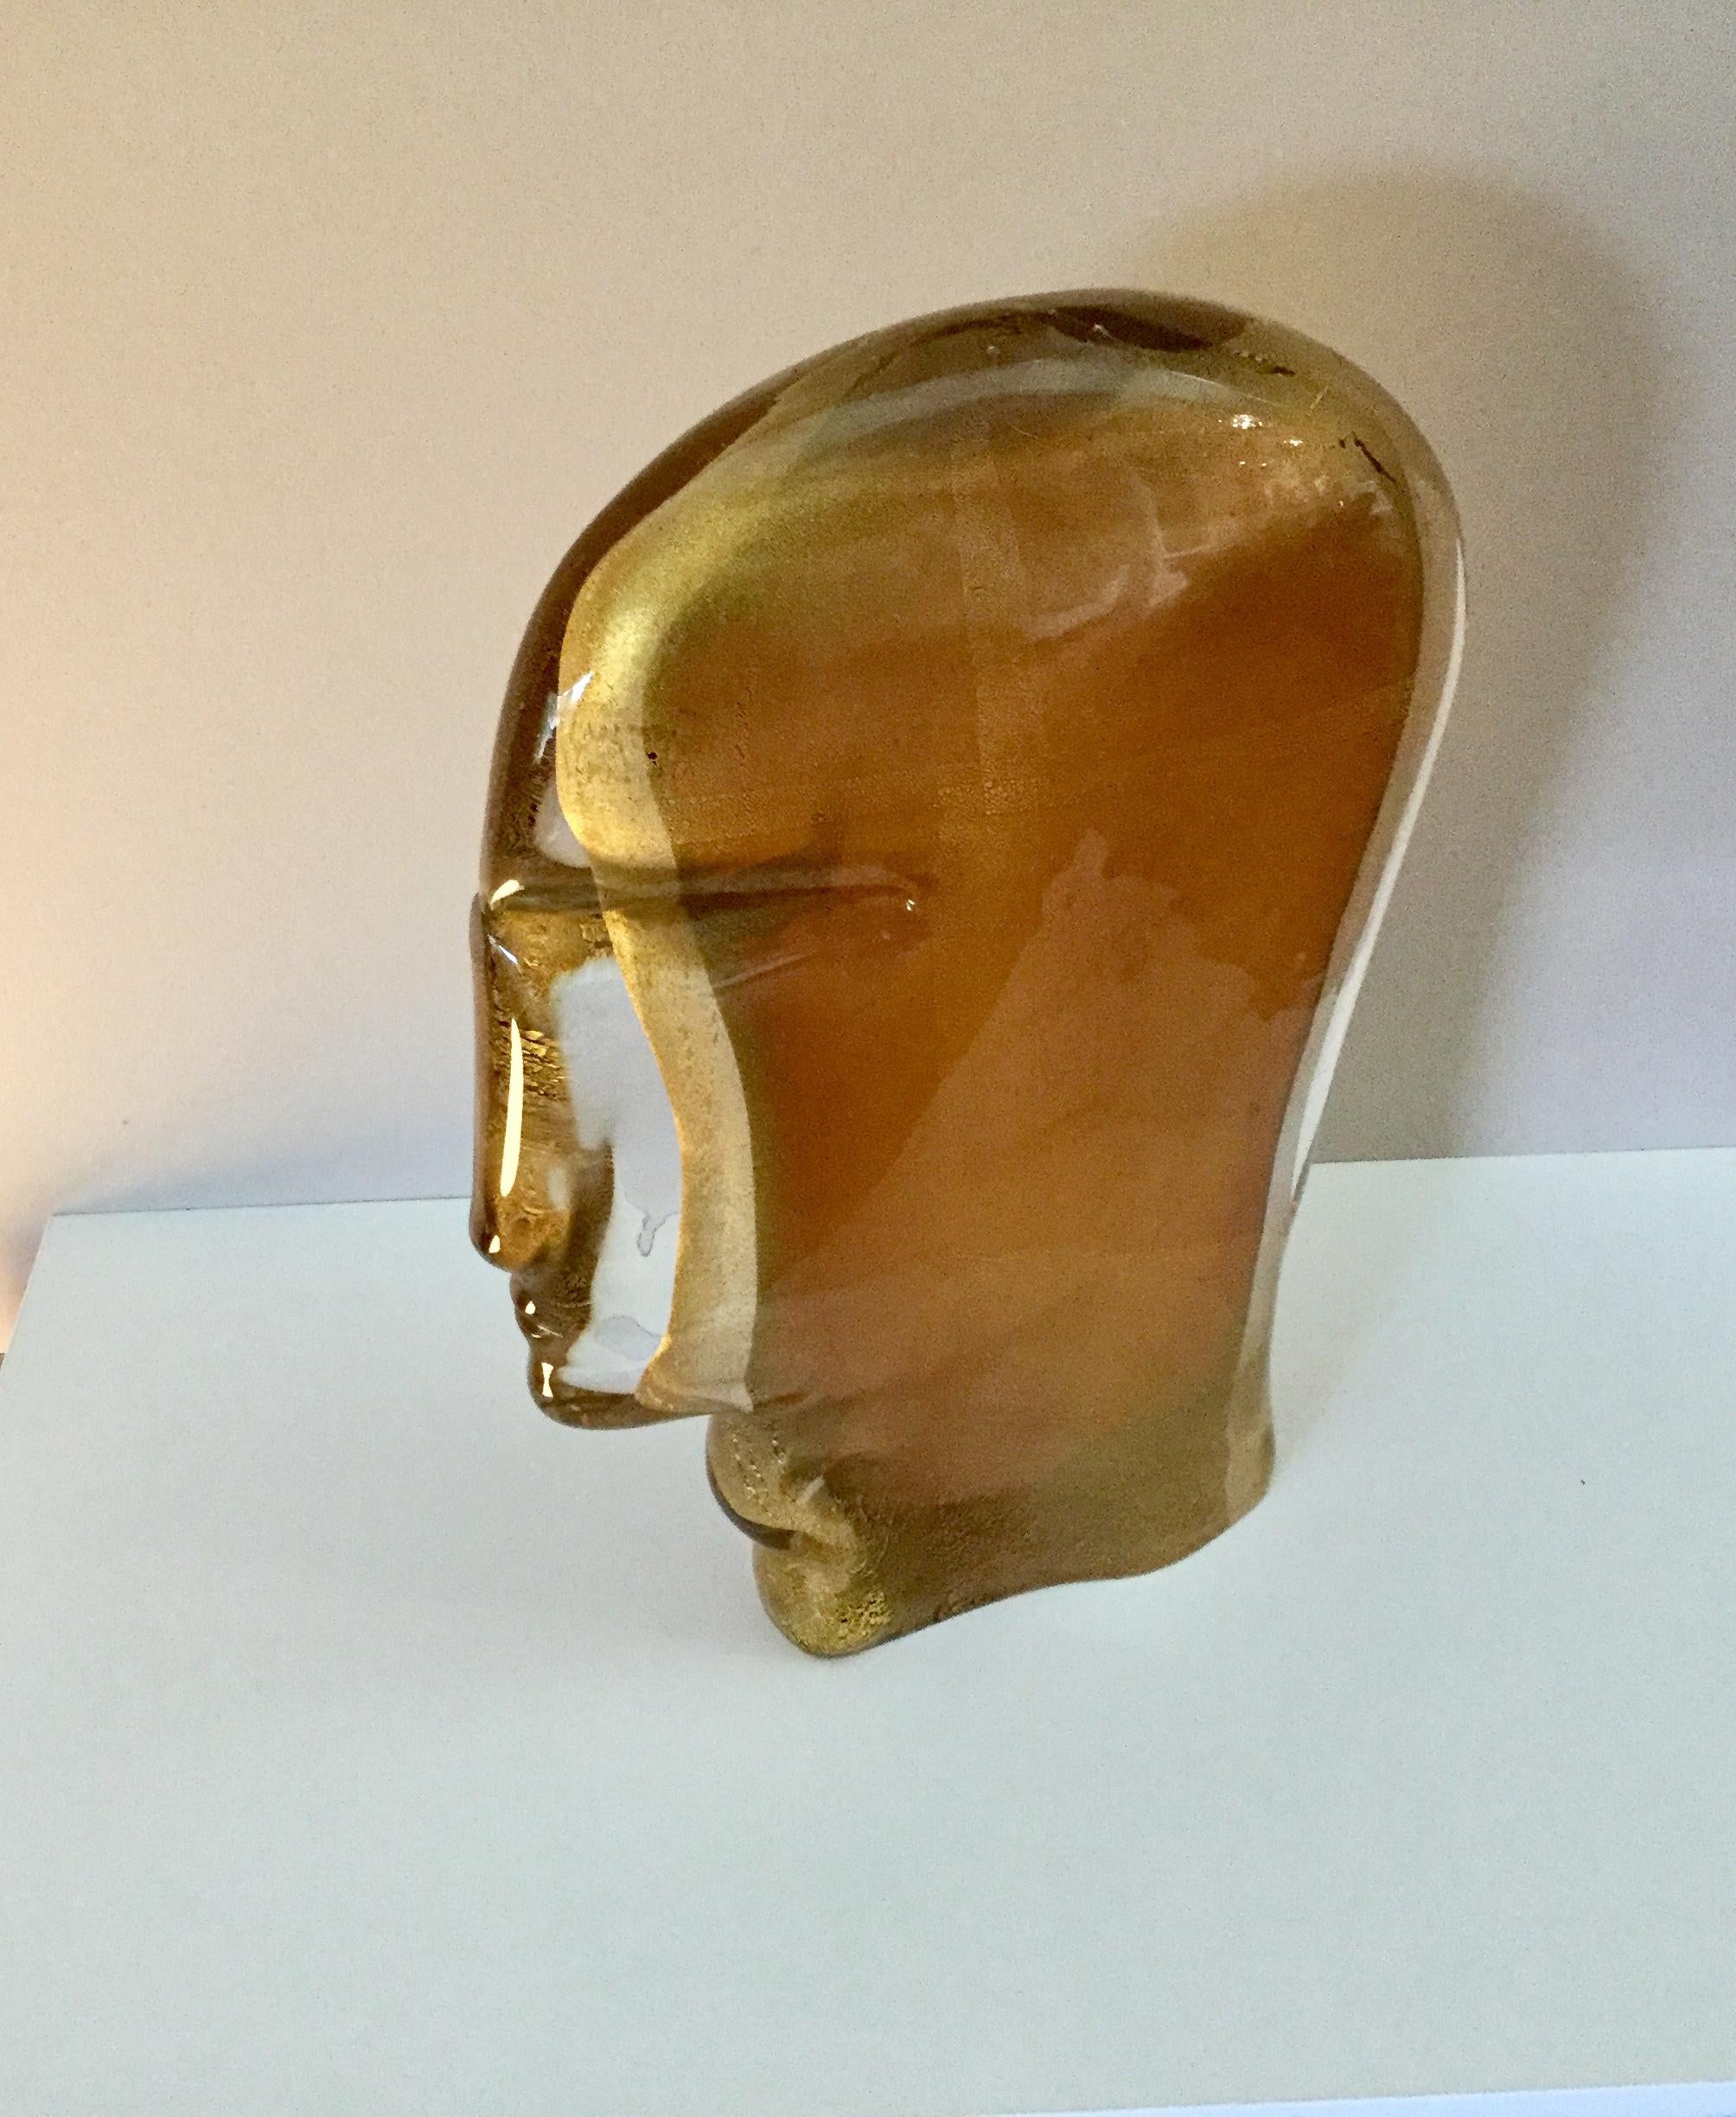 Amazing Murano glass sculpture by Luigi Benzoni. Signed and dated as pictured.